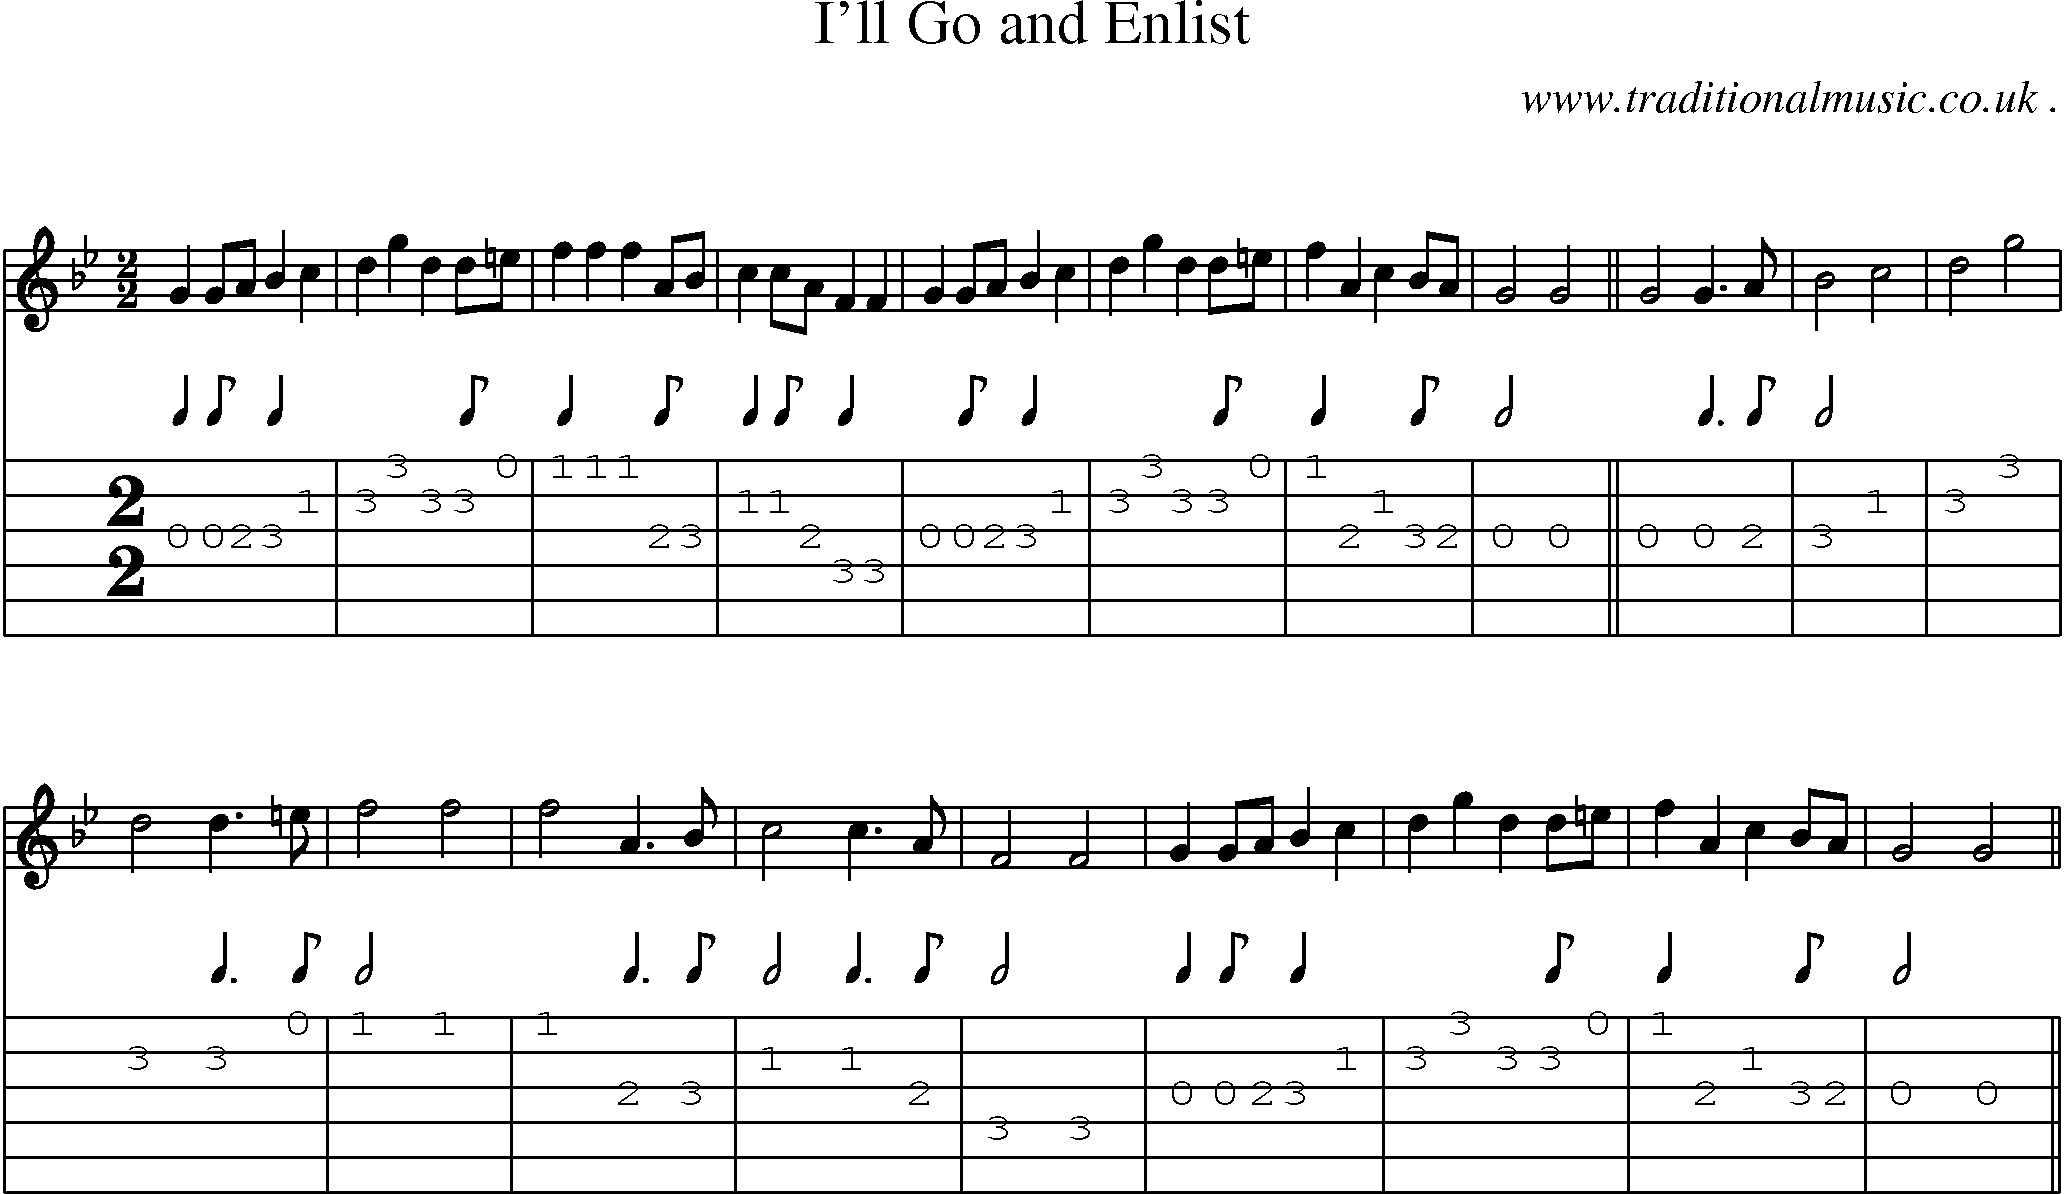 Sheet-Music and Guitar Tabs for Ill Go And Enlist